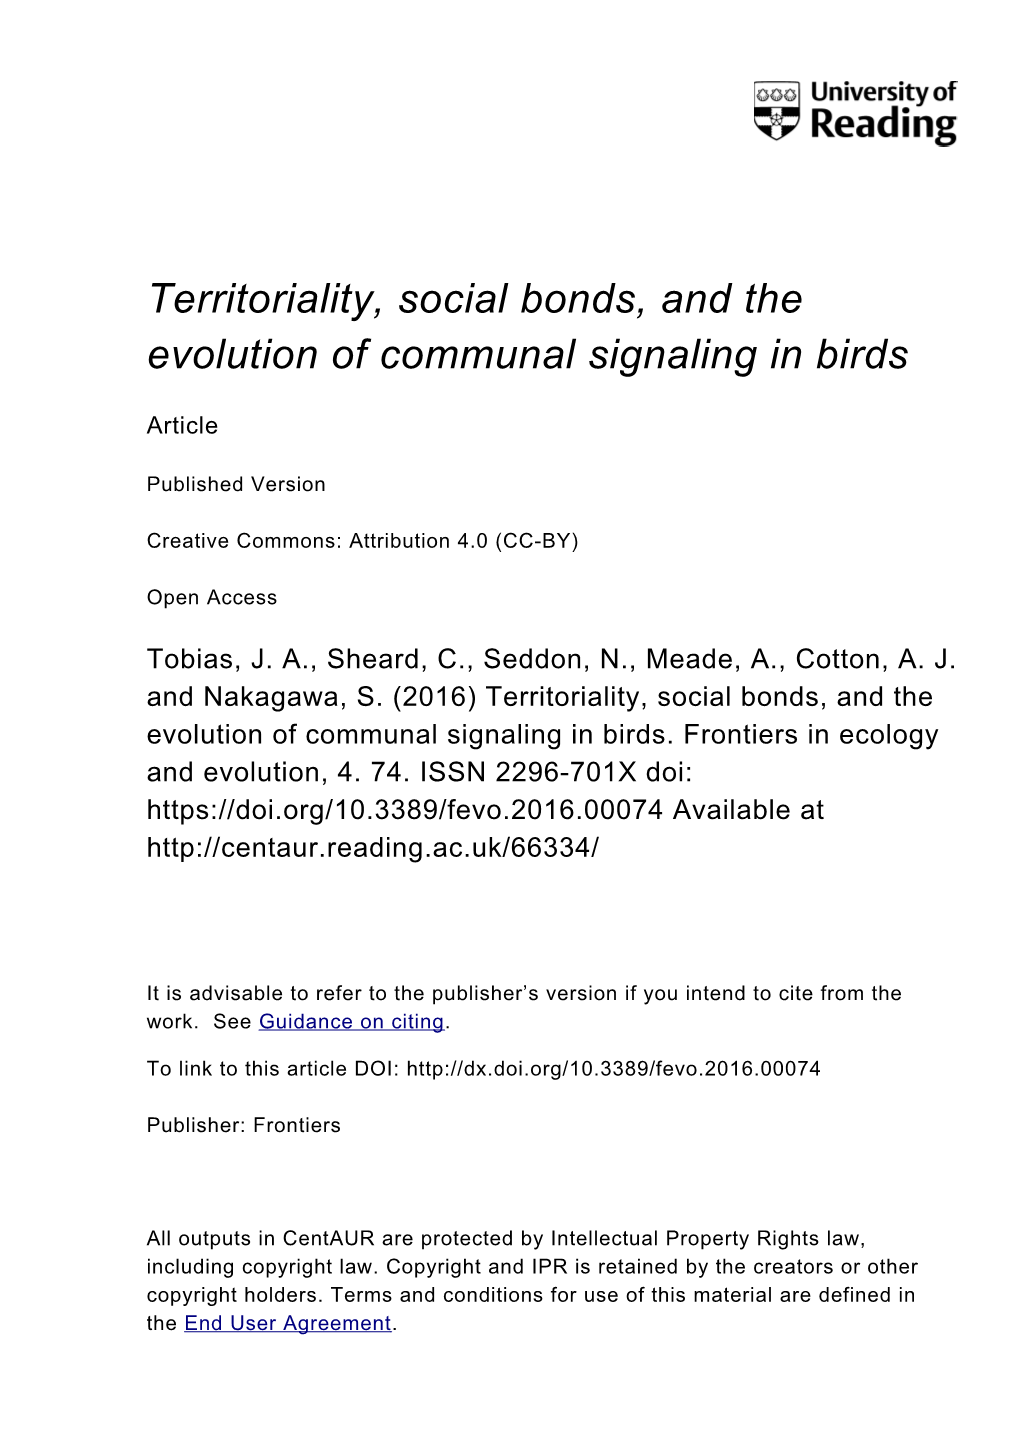 Territoriality, Social Bonds, and the Evolution of Communal Signaling in Birds